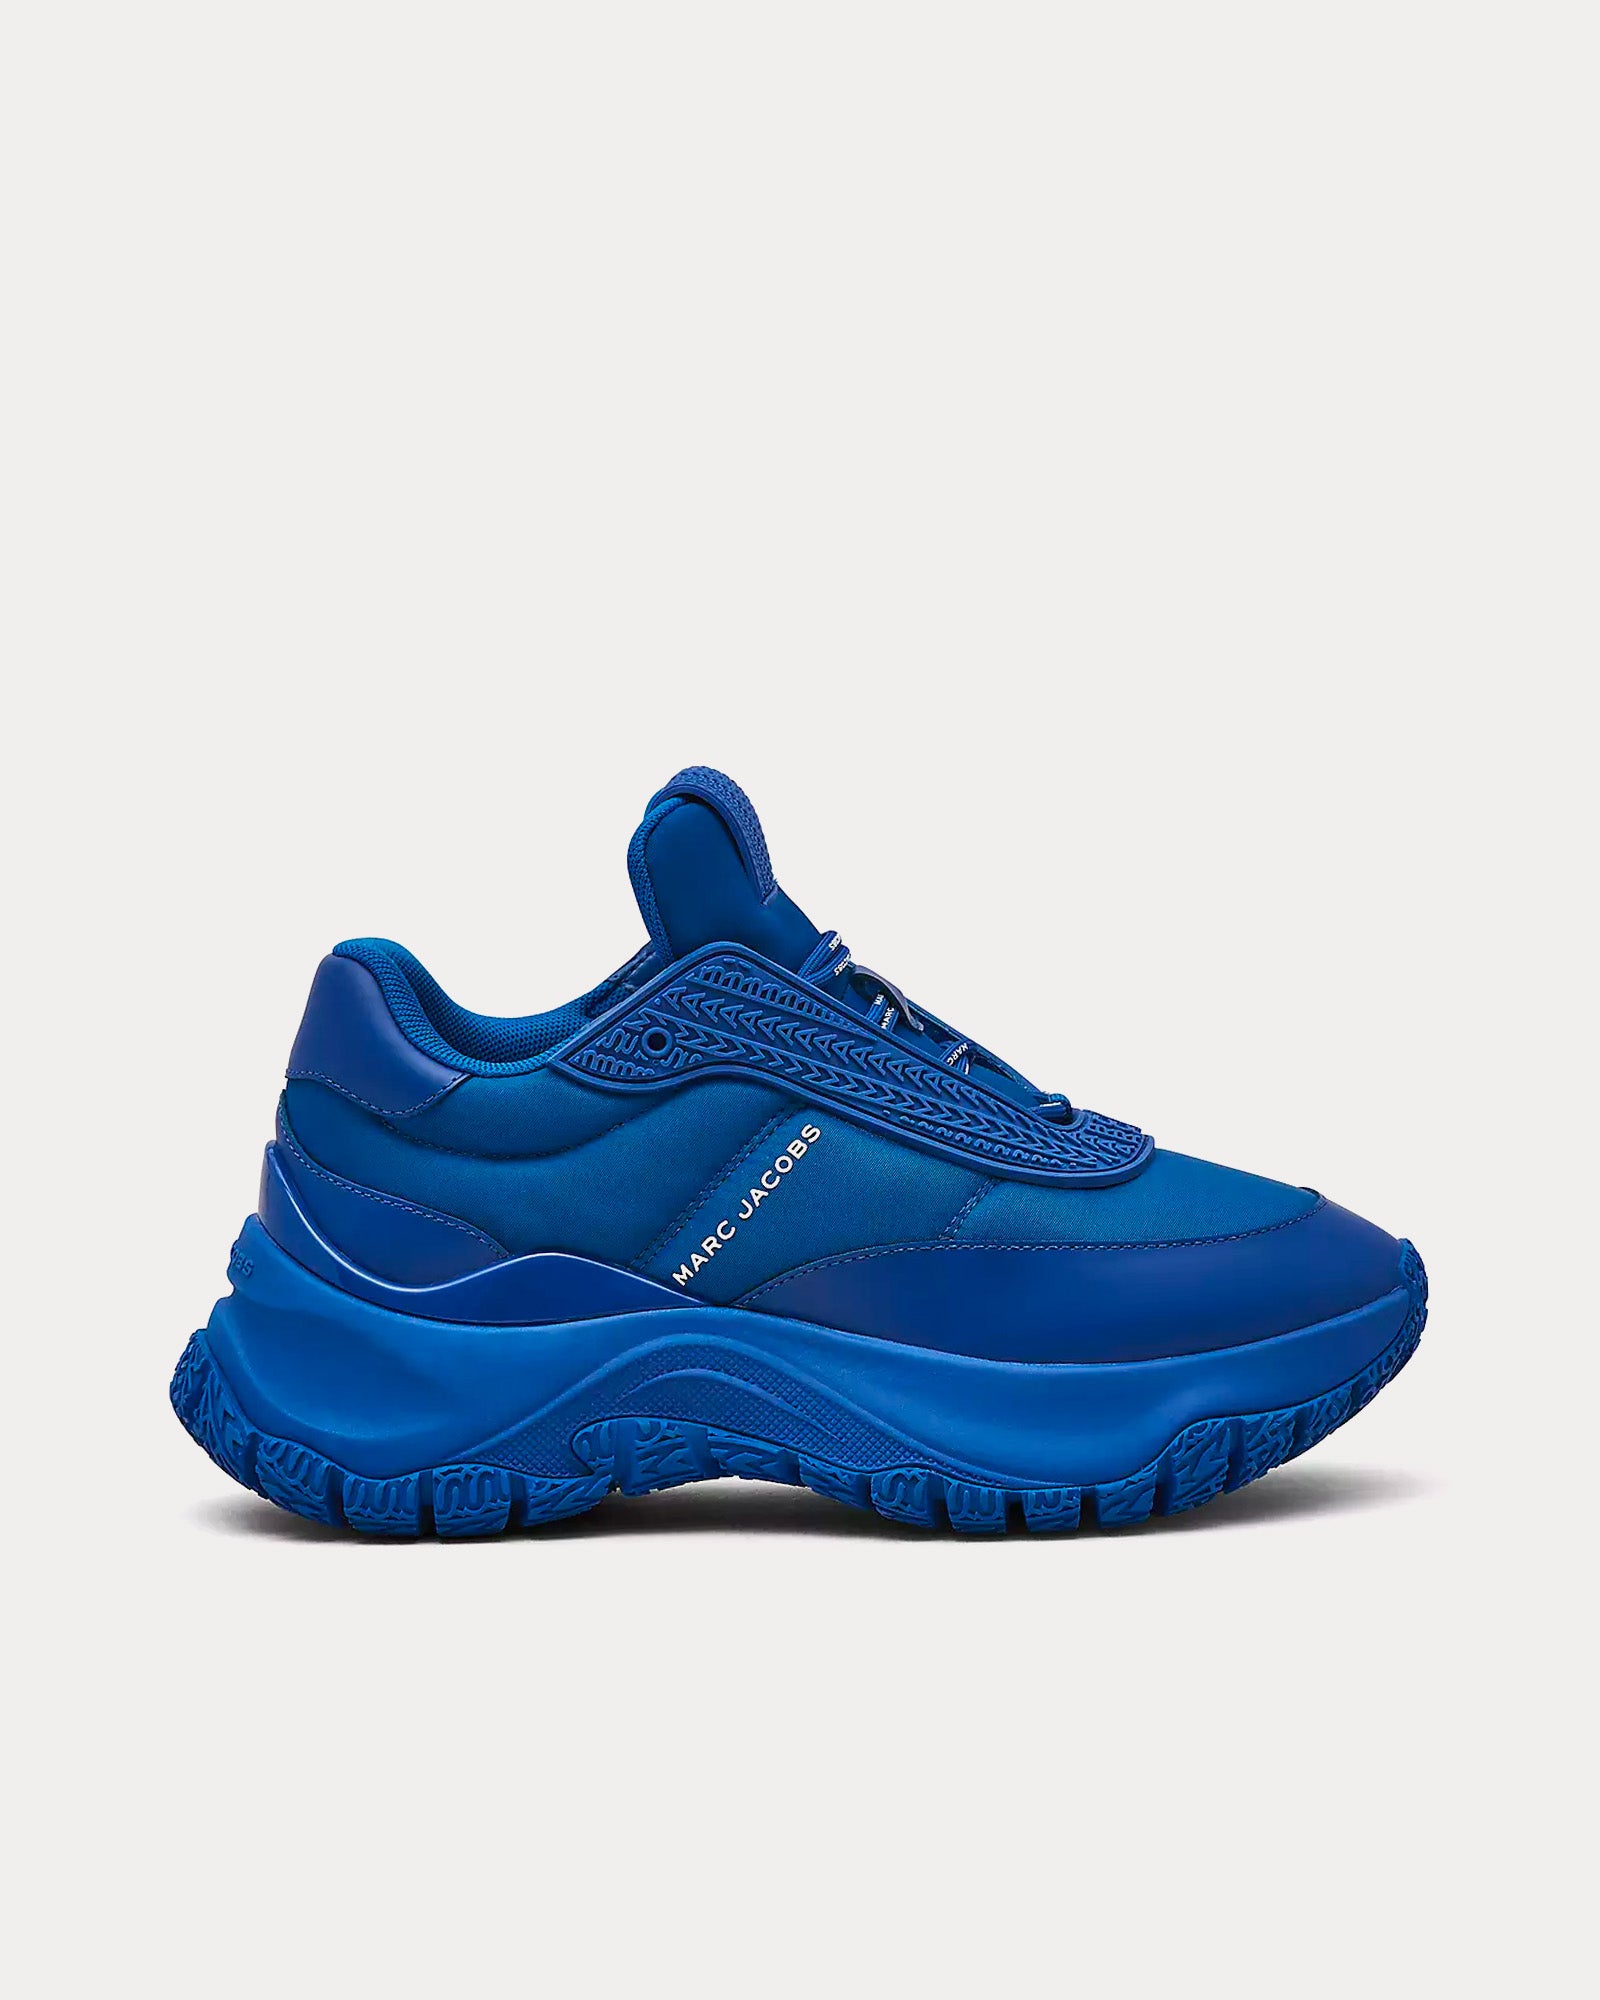 Marc Jacobs - The Lazy Runner Cobalt Low Top Sneakers